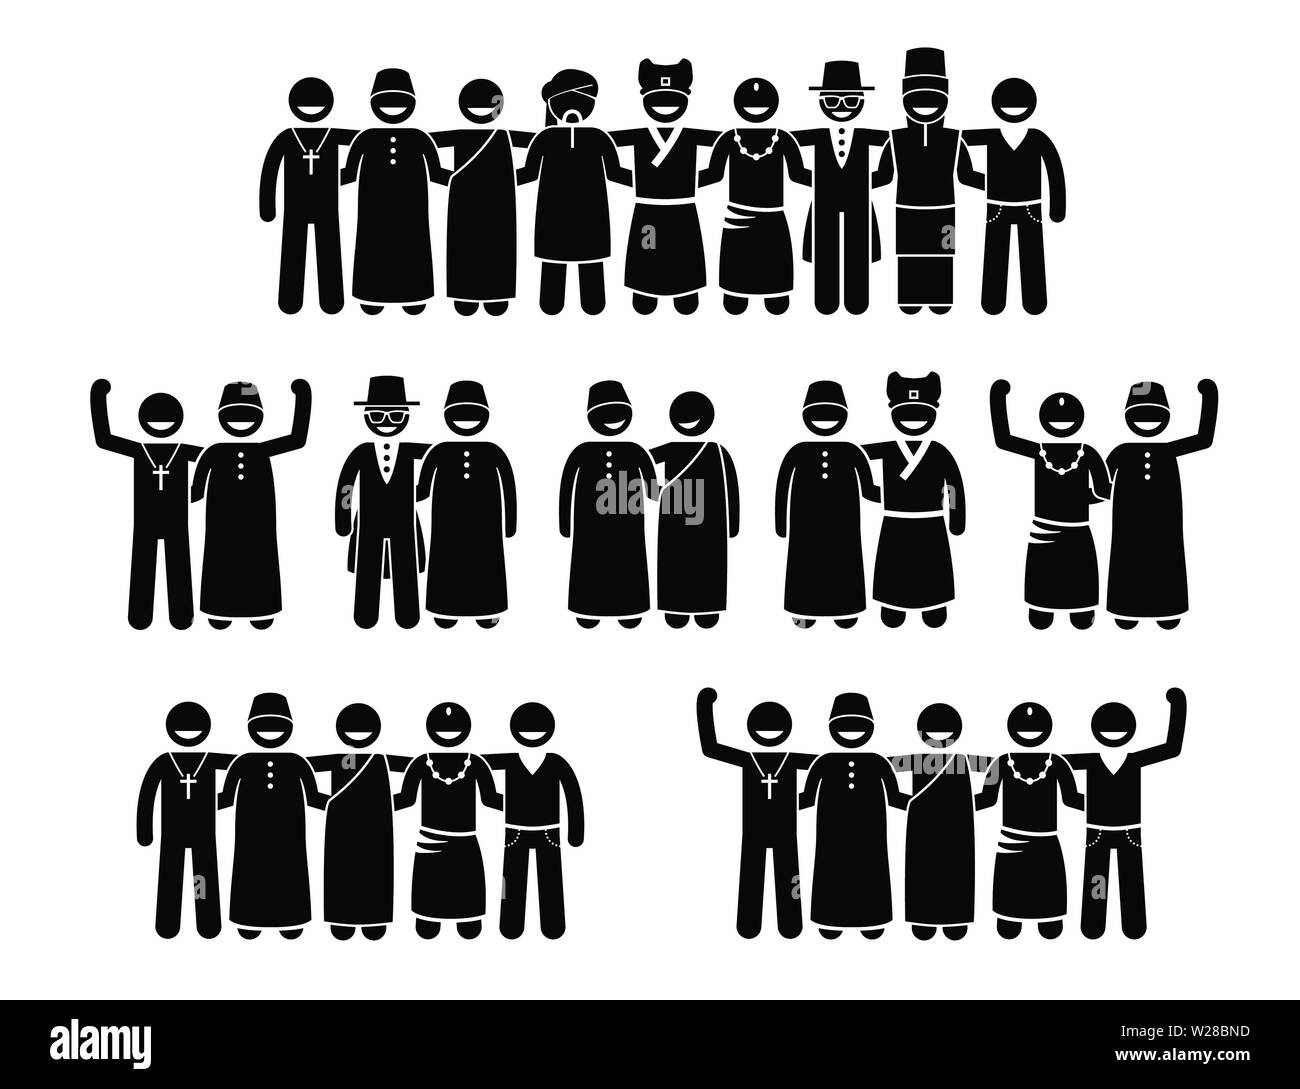 Mixed culture, multiracial, multicultural, and peaceful religions of human standing together. Vector artwork depicts people of different religions sta Stock Vector